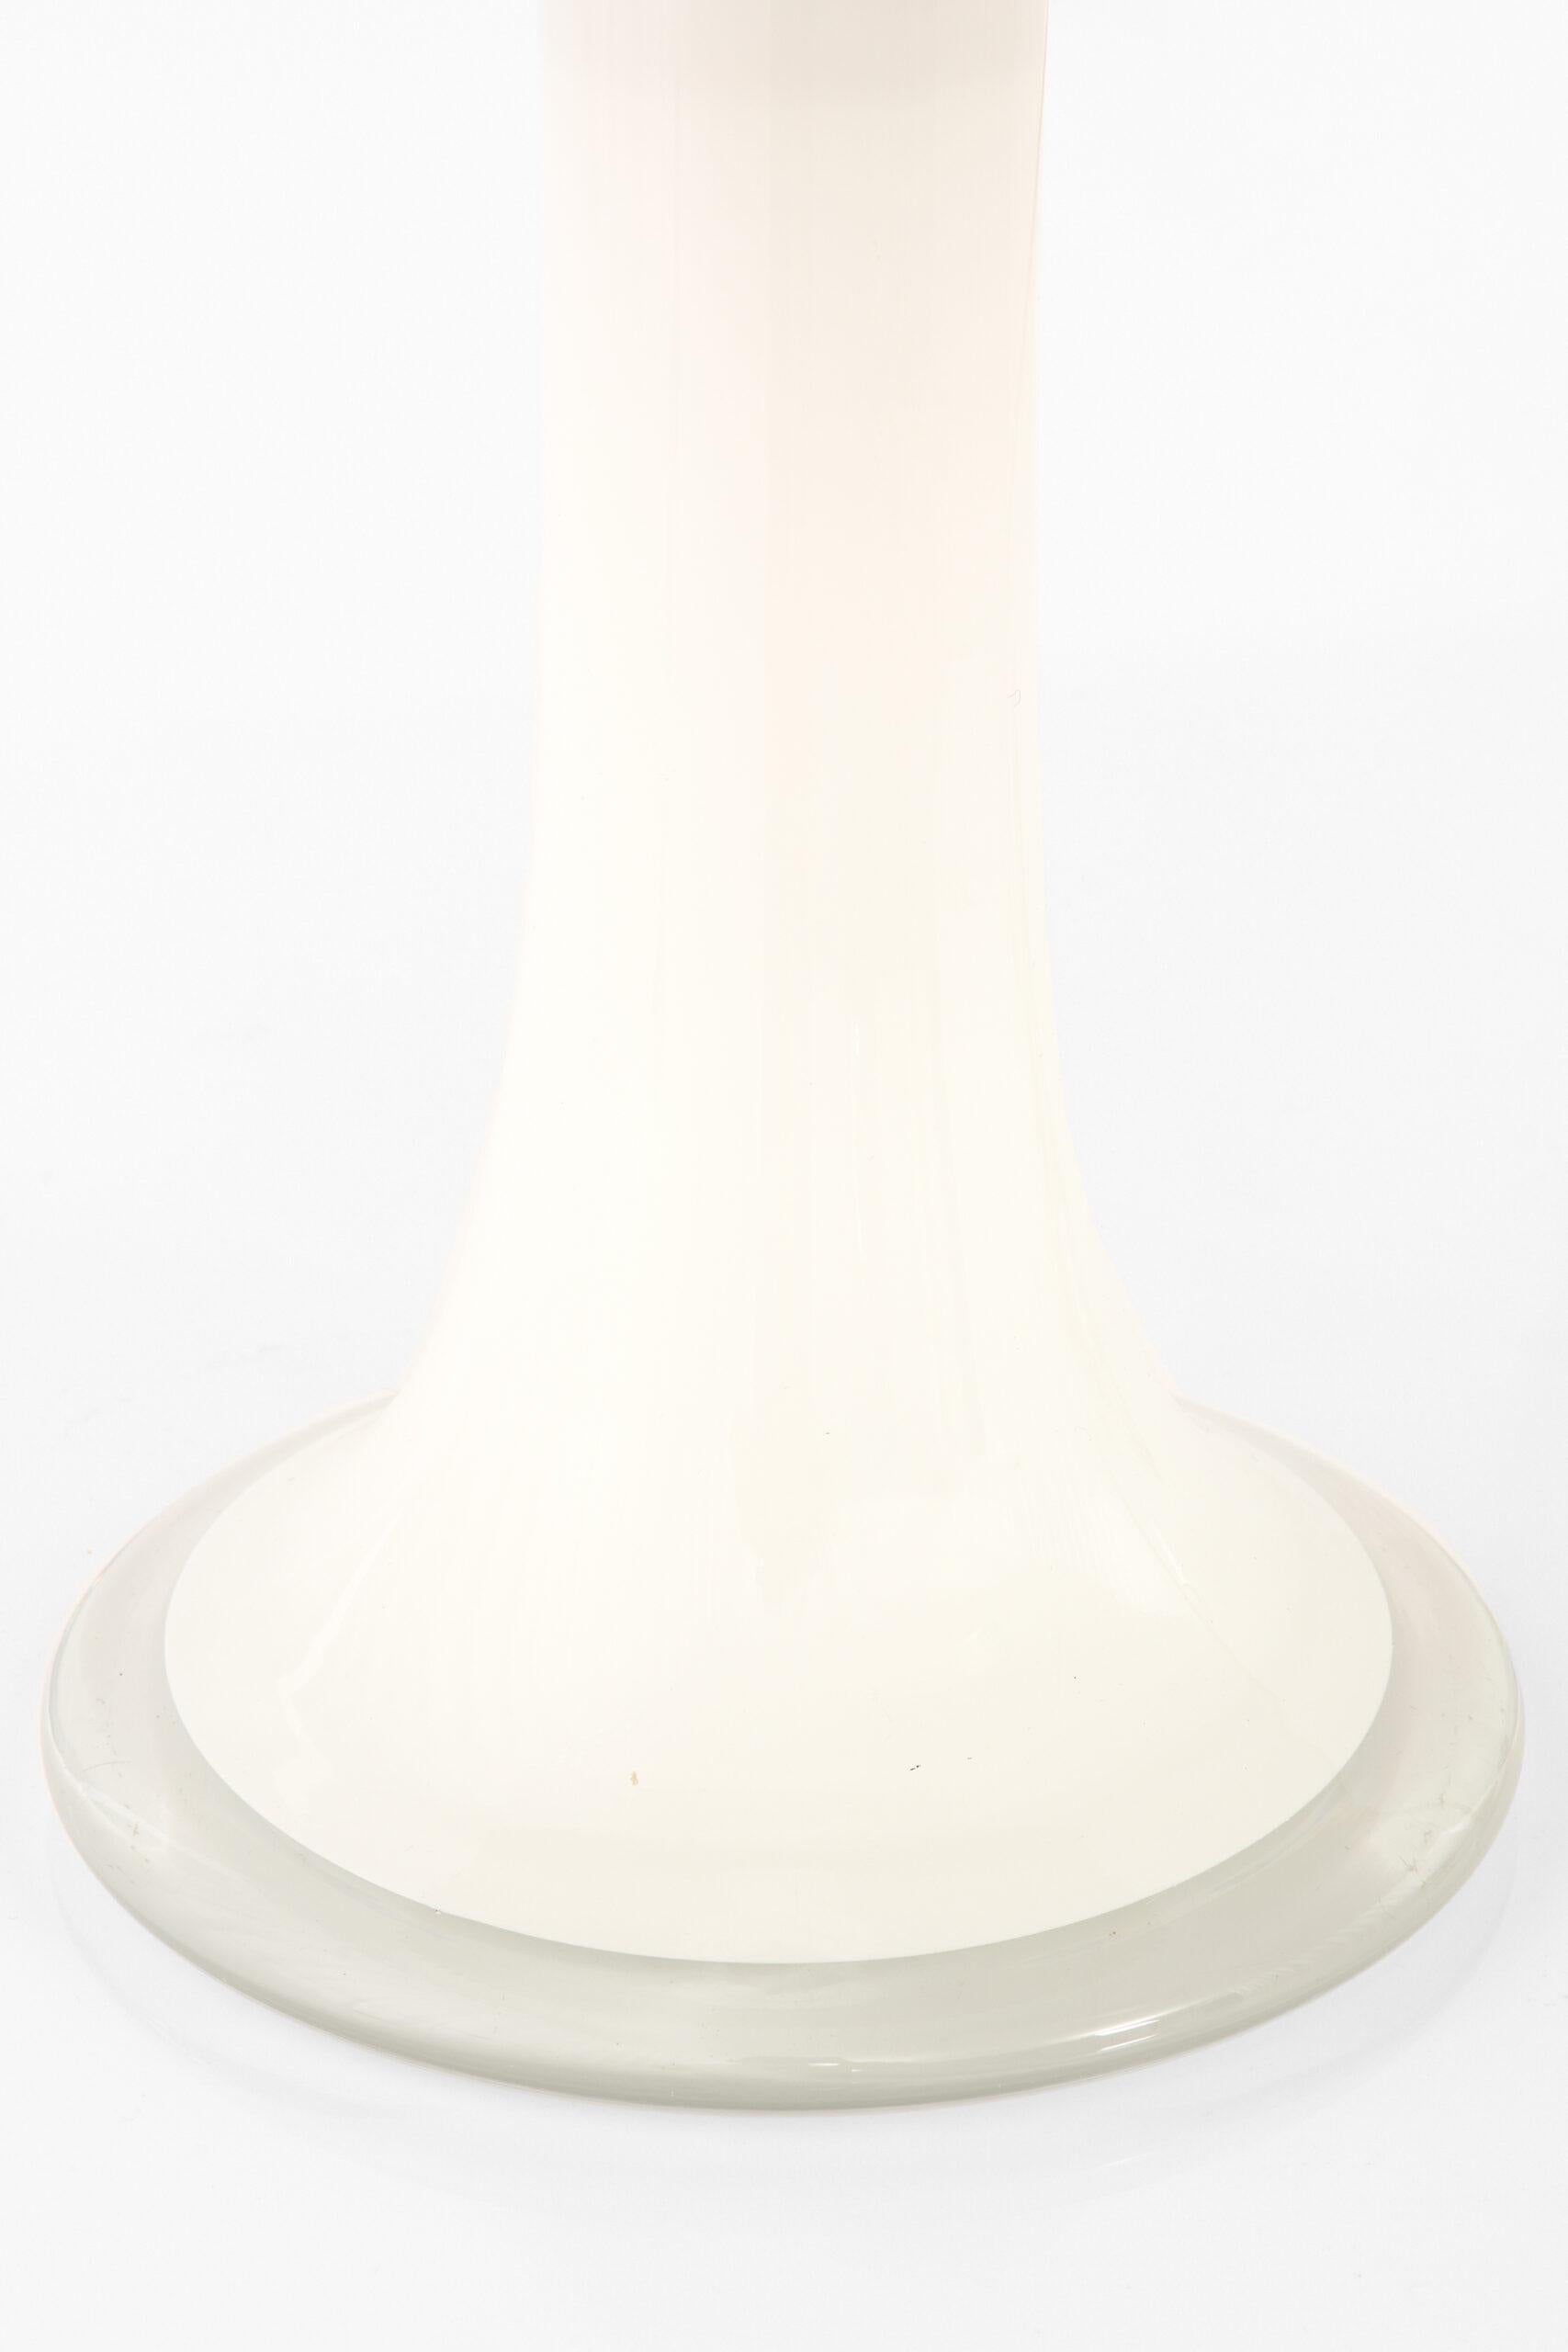 Scandinavian Modern Lisa Johansson-Pape Table Lamp Model No. 06-017 Produced by Oy Stockmann-Ornö AB For Sale